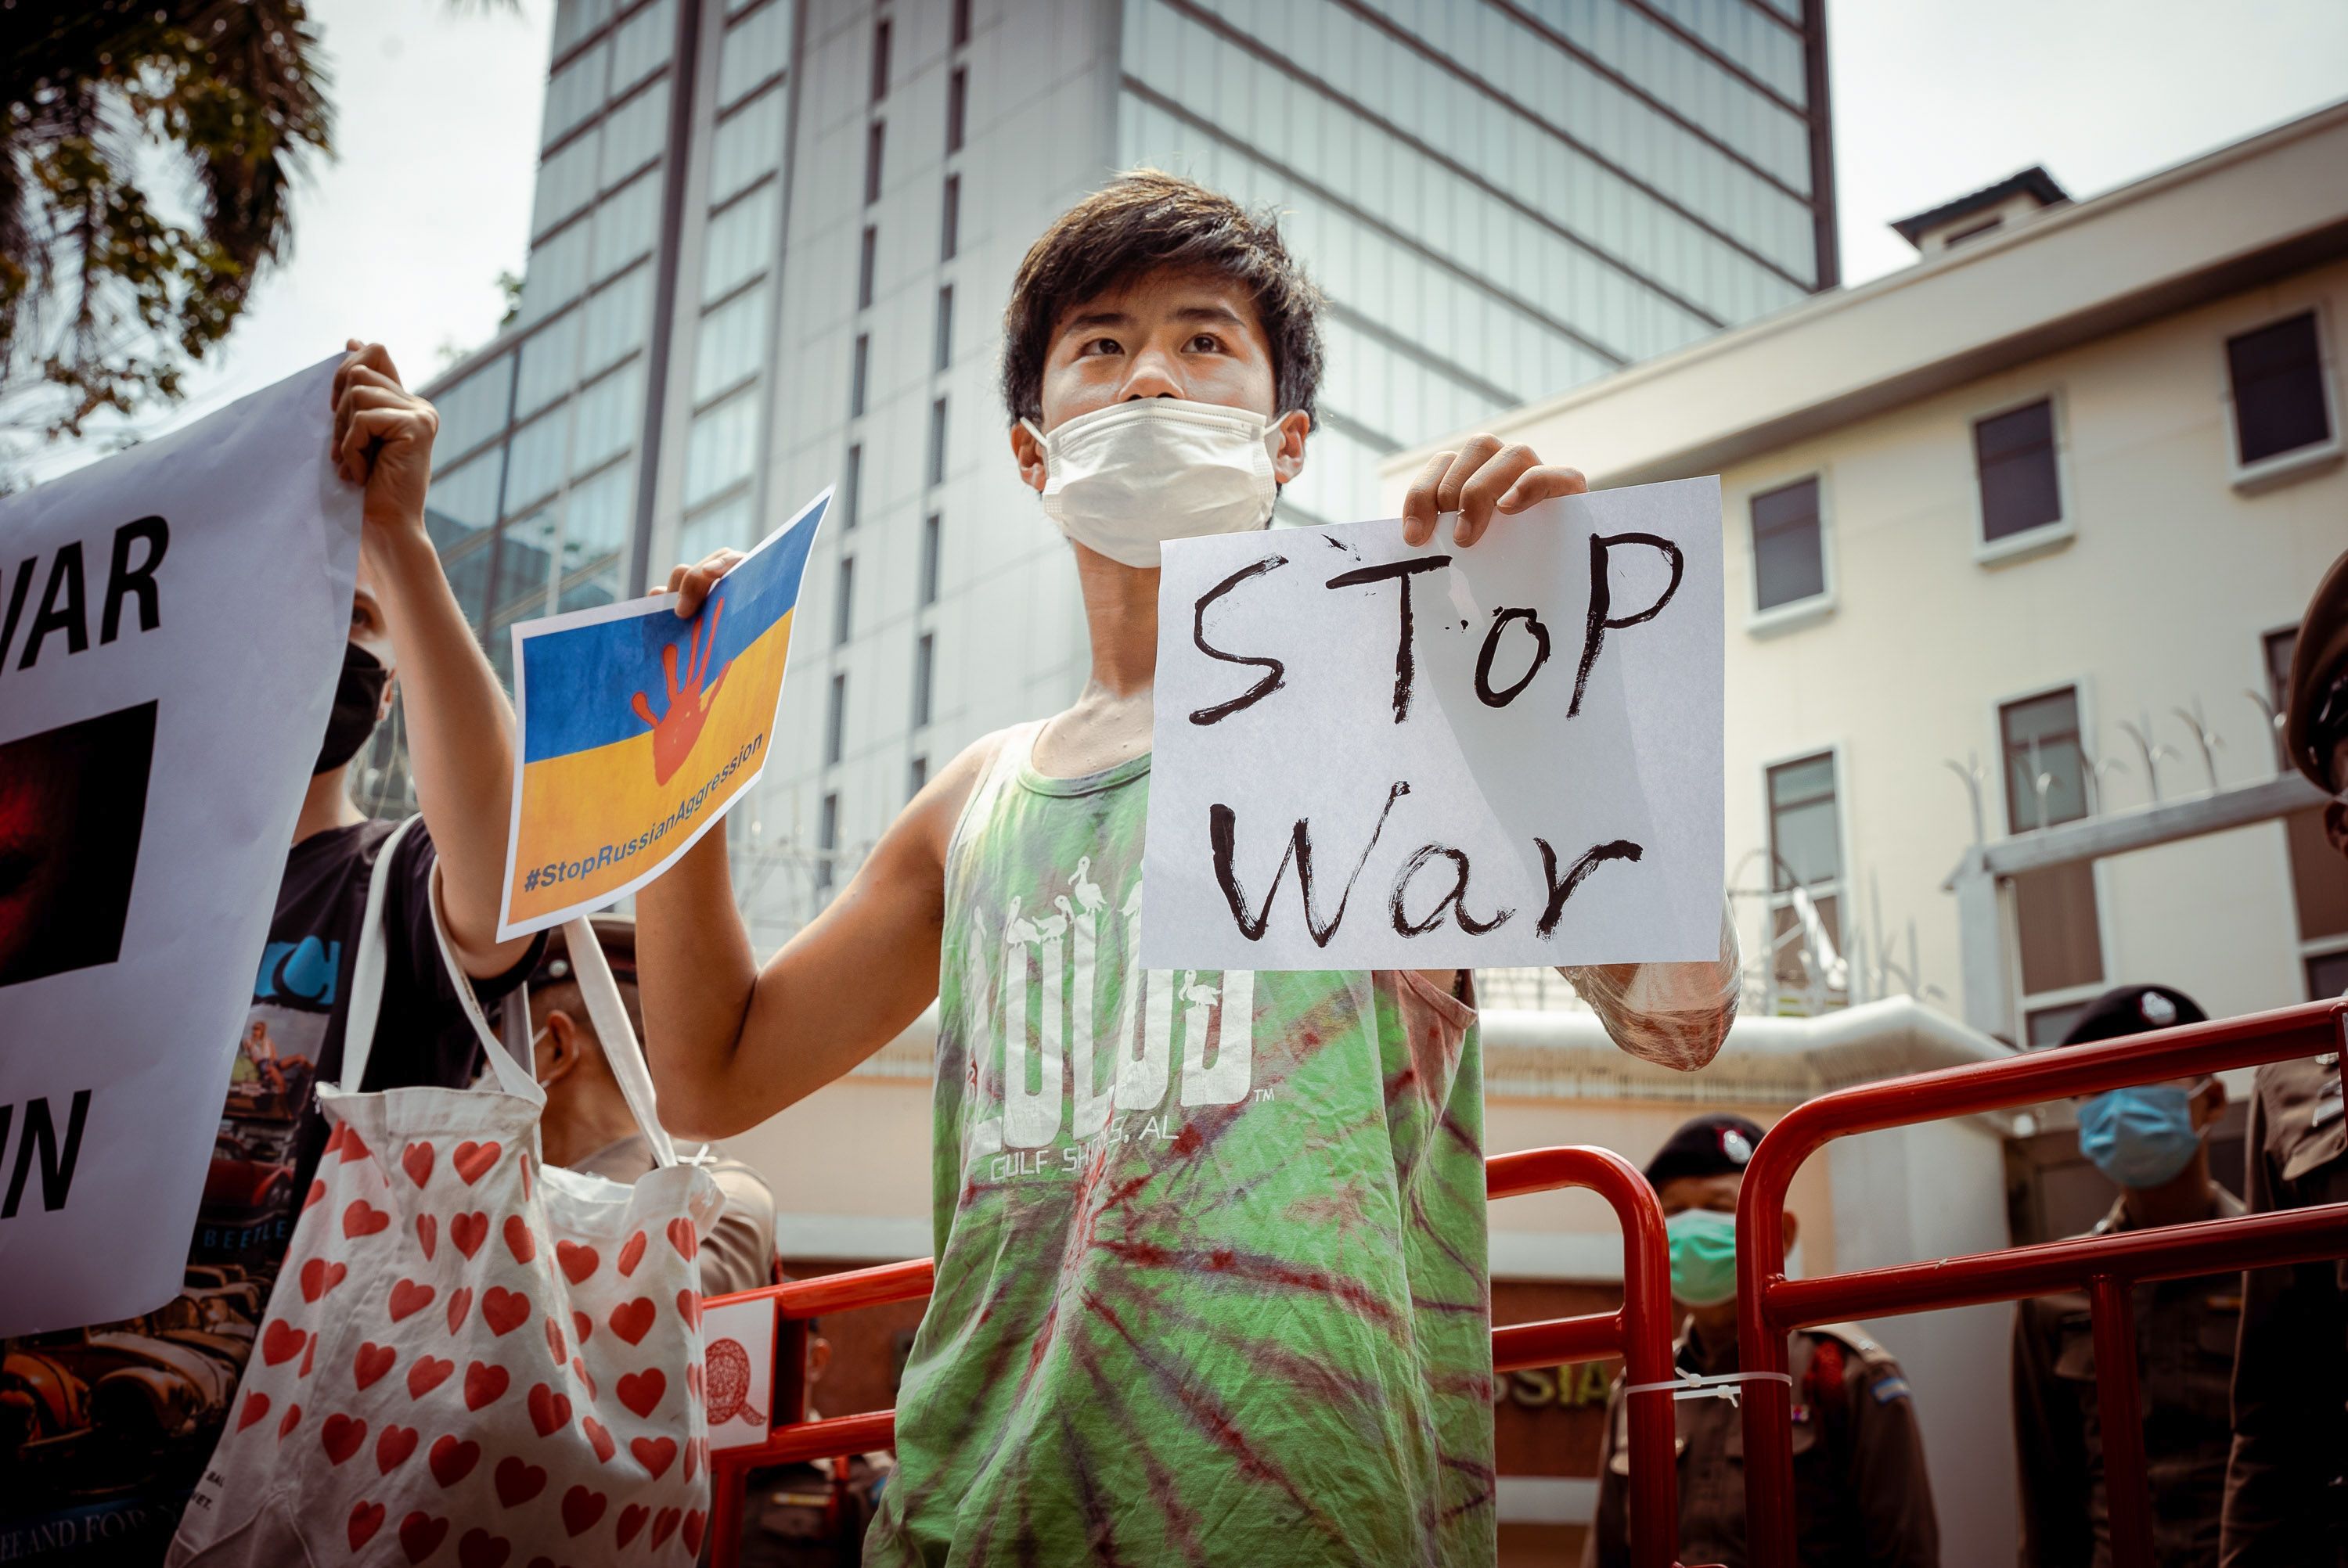 Photo of a person holding a sign that says "Stop war"